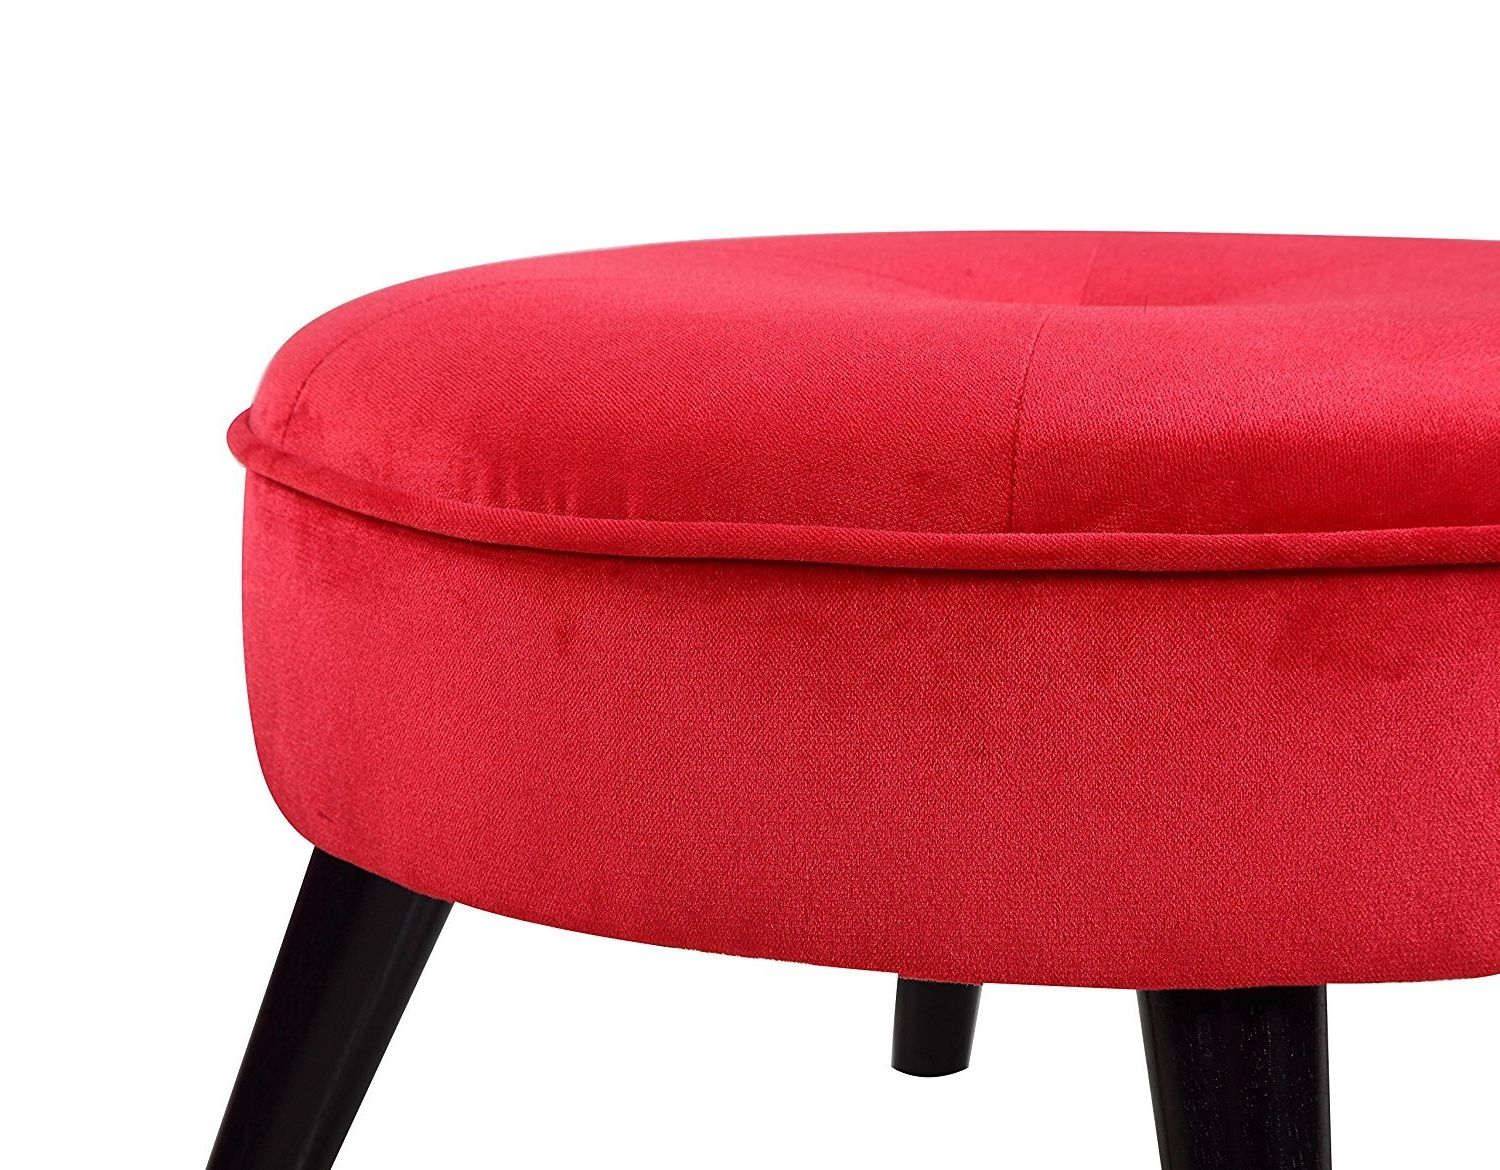 Fashionable Red Small Footstool Round Footrest Ottoman In Velvet Upholstery Dark Inside Dark Red And Cream Woven Pouf Ottomans (View 2 of 10)